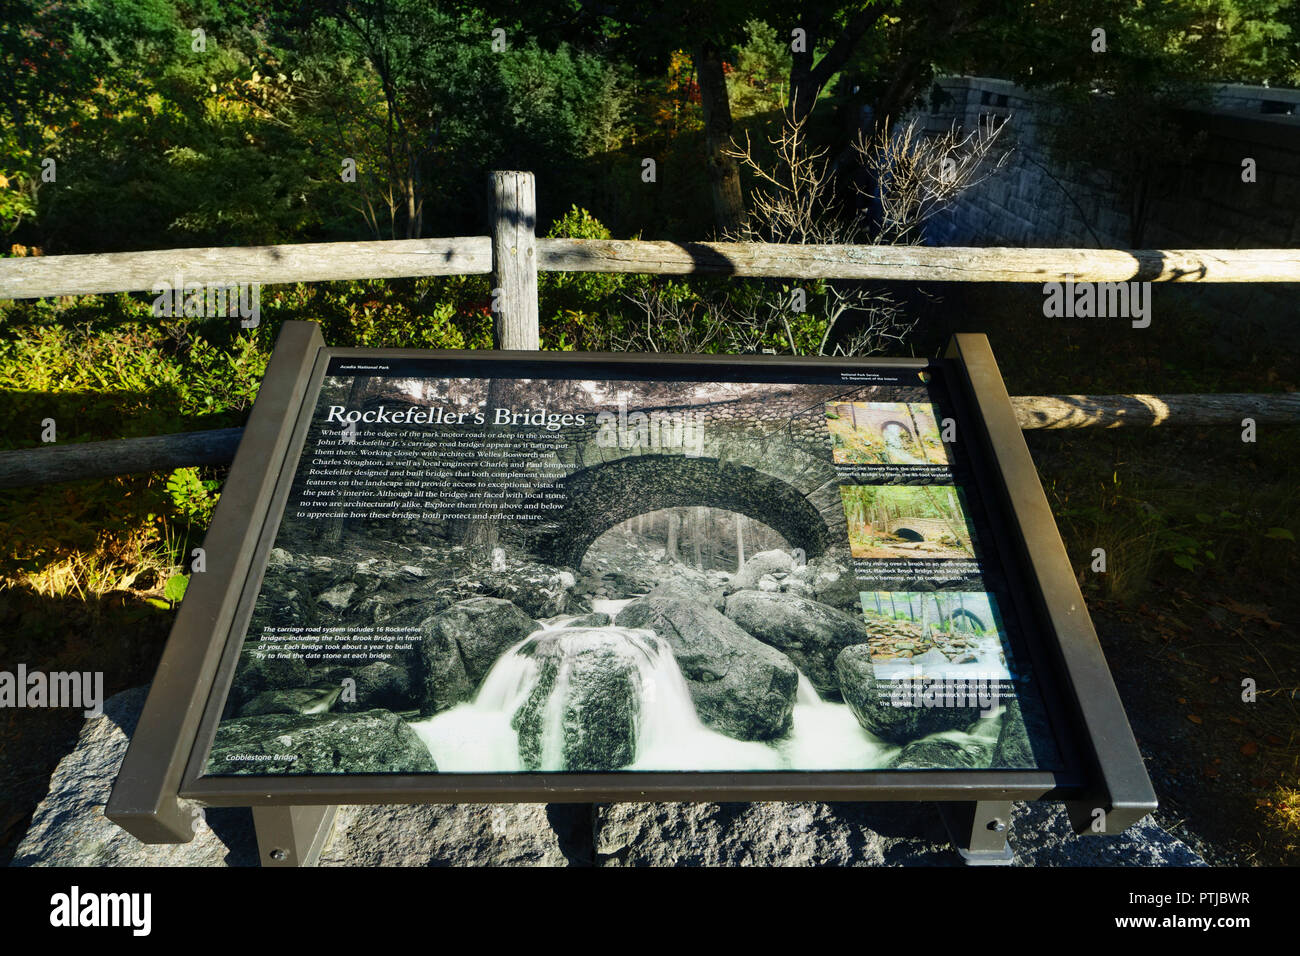 Information board about the Rockefeller Bridges in Acadia National Park, Maine, USA. Stock Photo